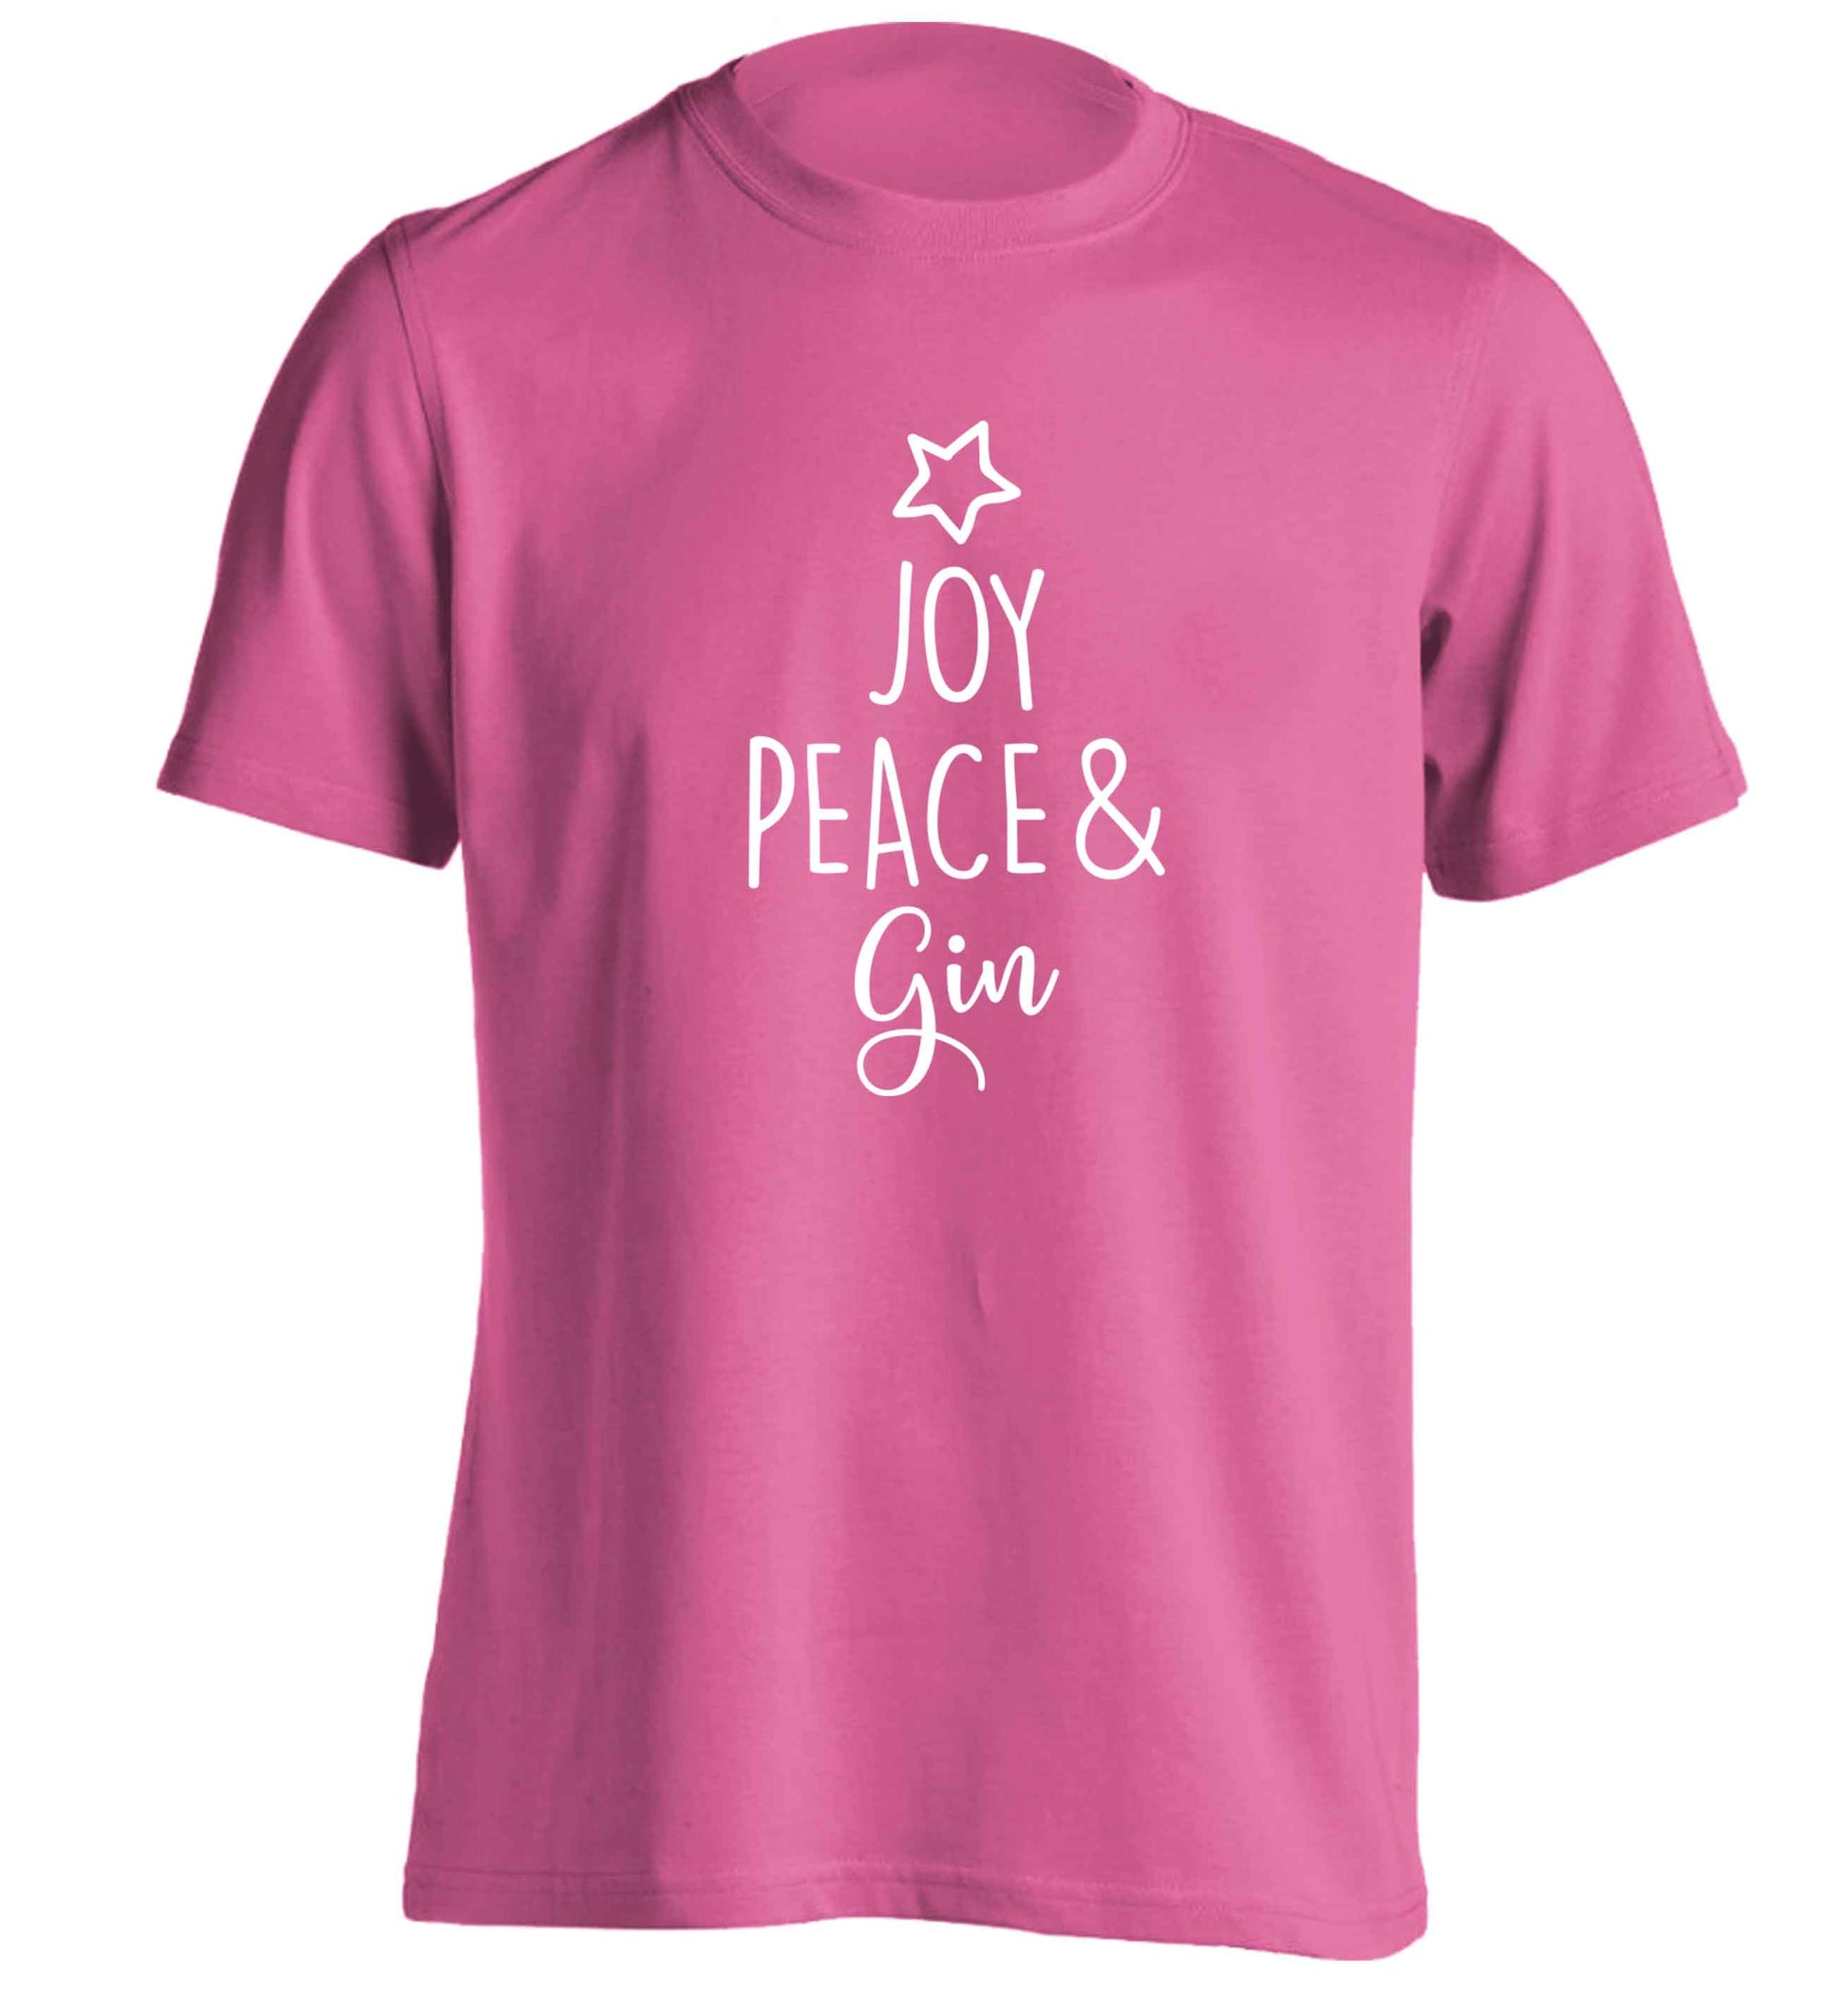 Joy peace and gin adults unisex pink Tshirt 2XL